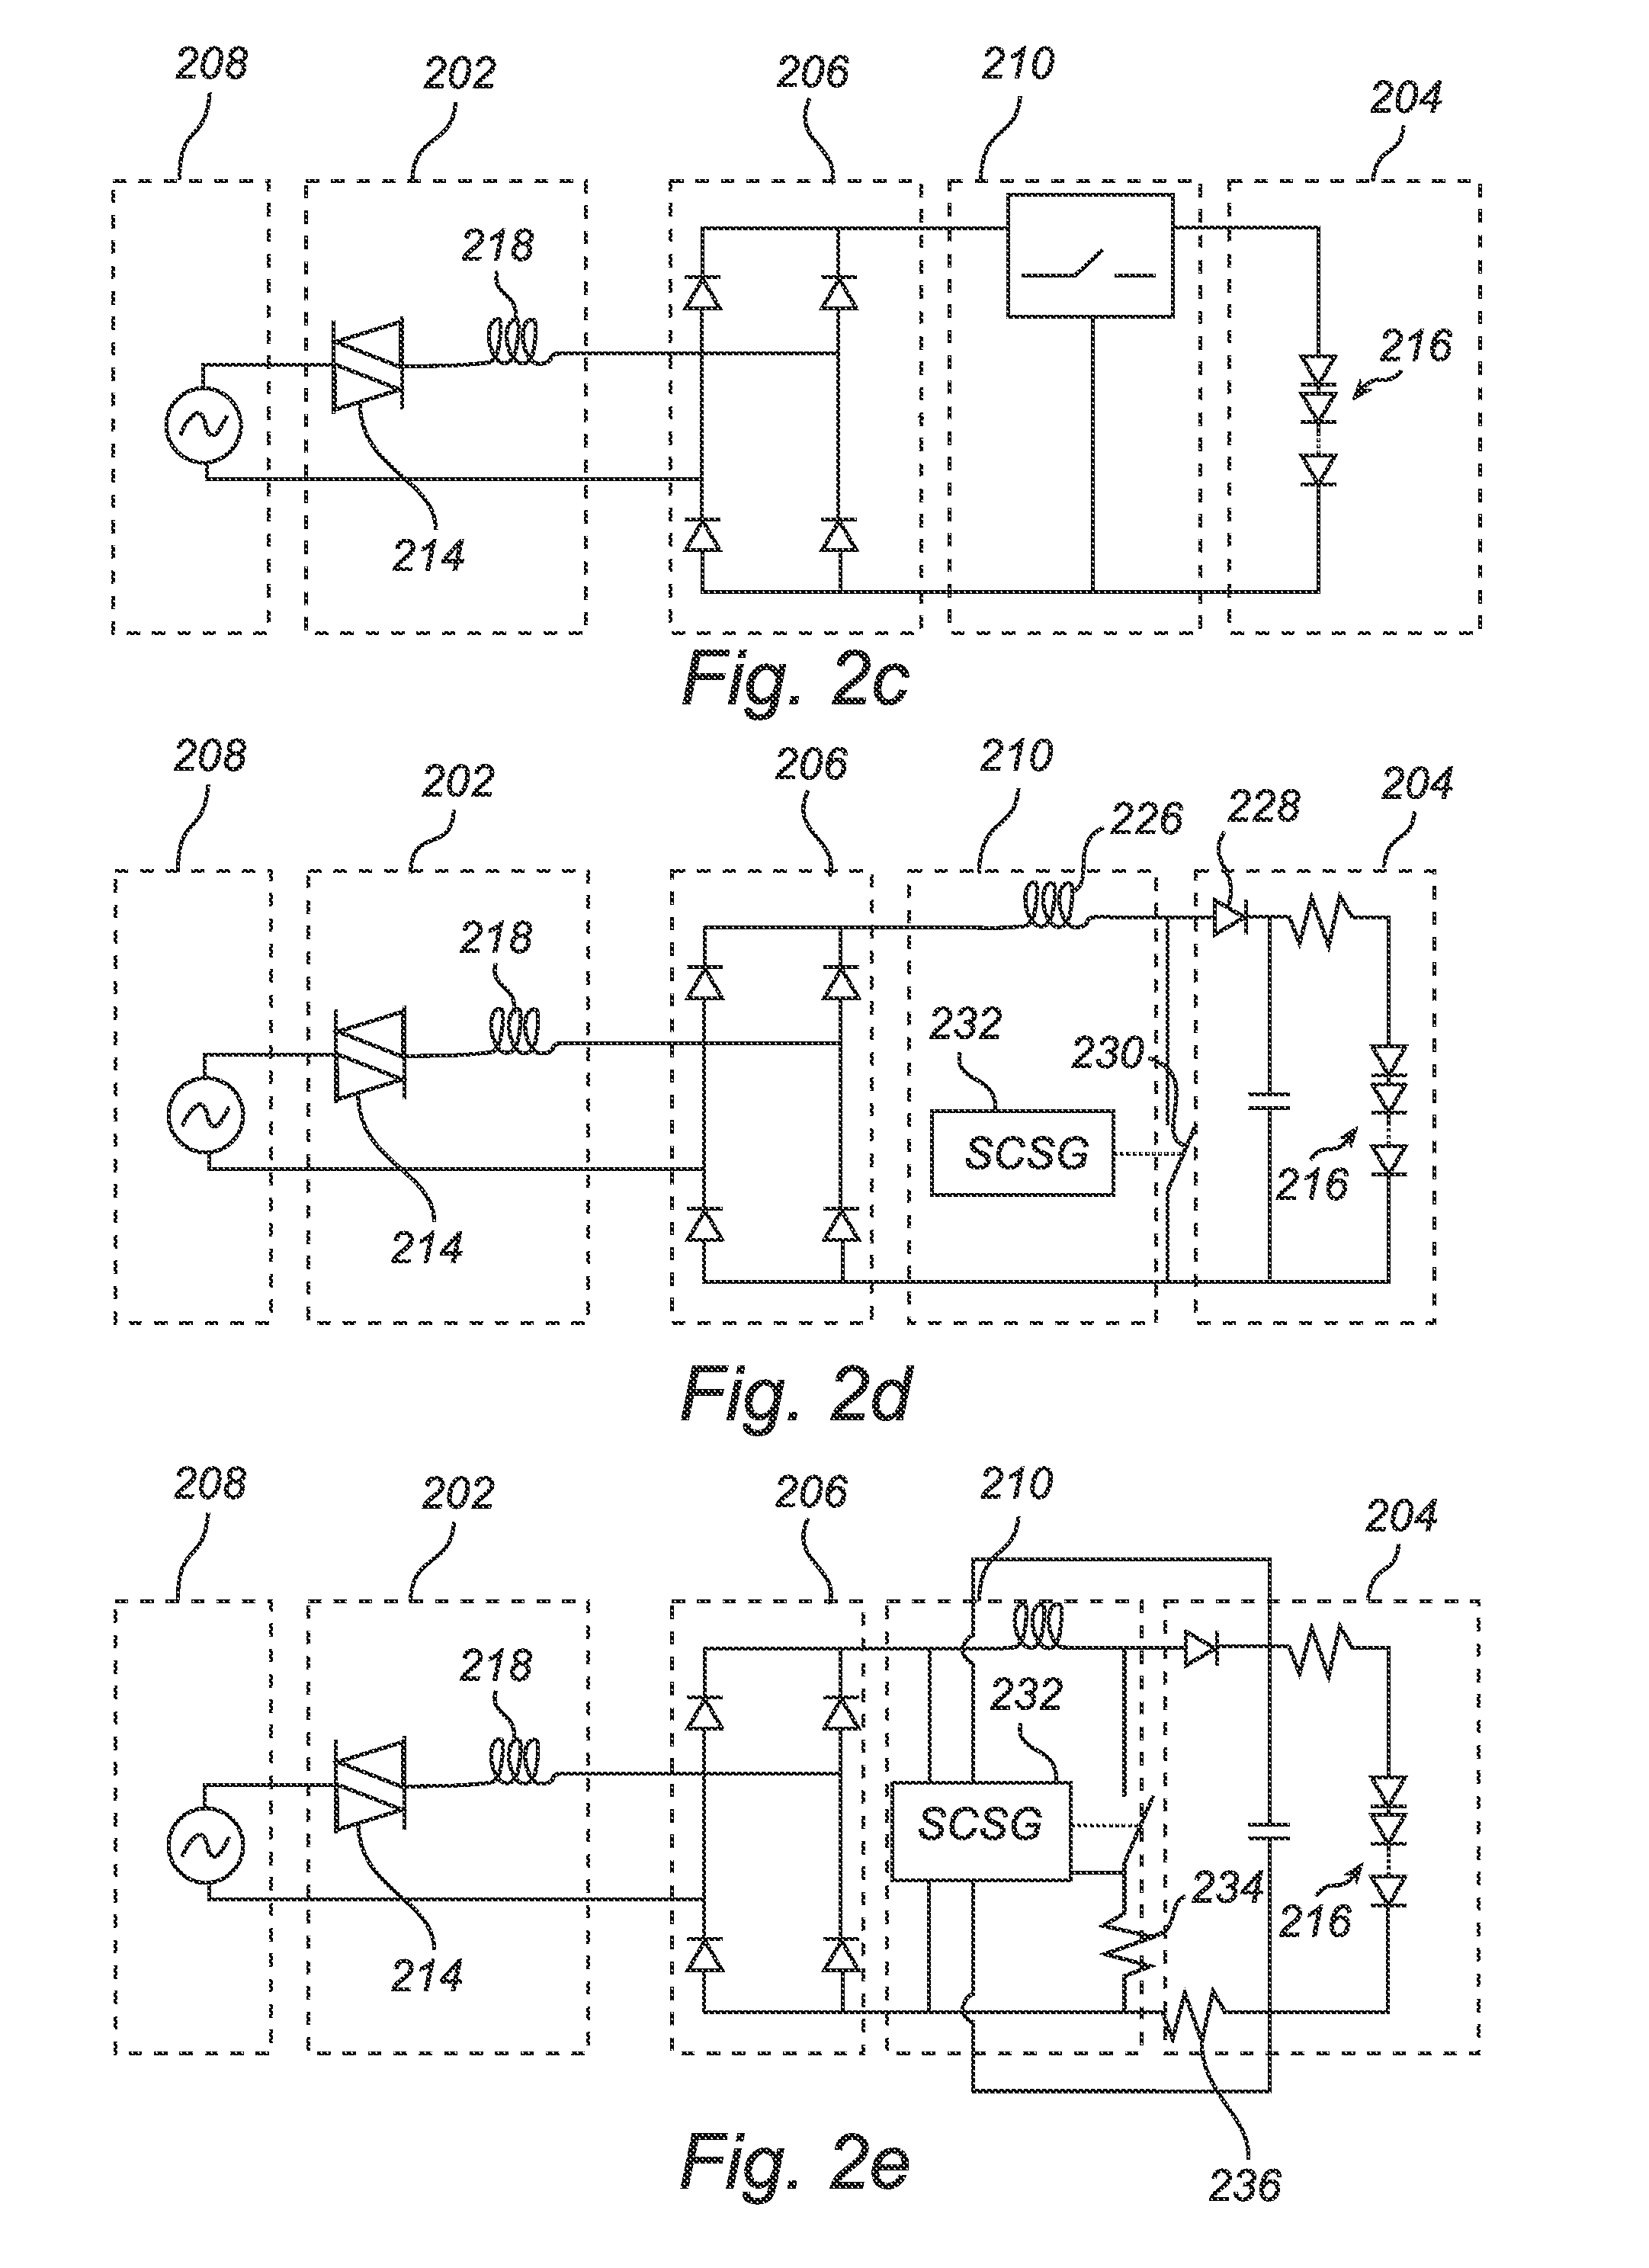 Power interface with leds for a triac dimmer